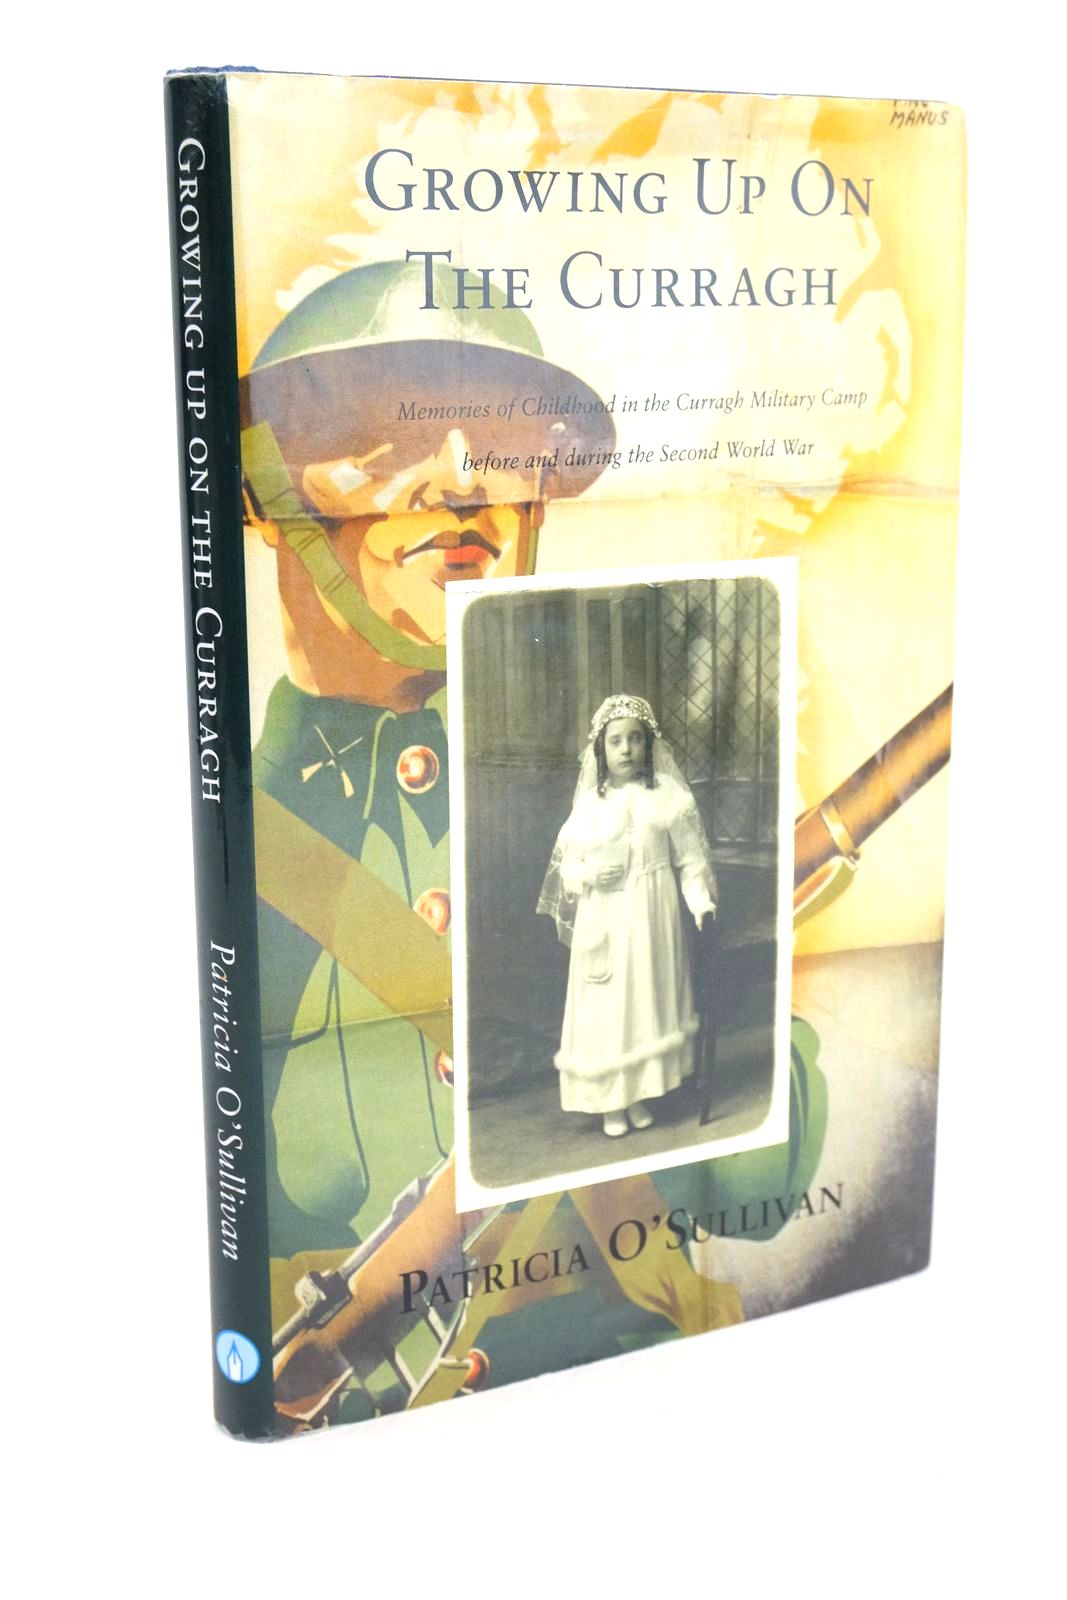 Photo of GROWING UP ON THE CURRAGH written by O'Sullivan, Patricia published by Original Writing Ltd (STOCK CODE: 1327472)  for sale by Stella & Rose's Books